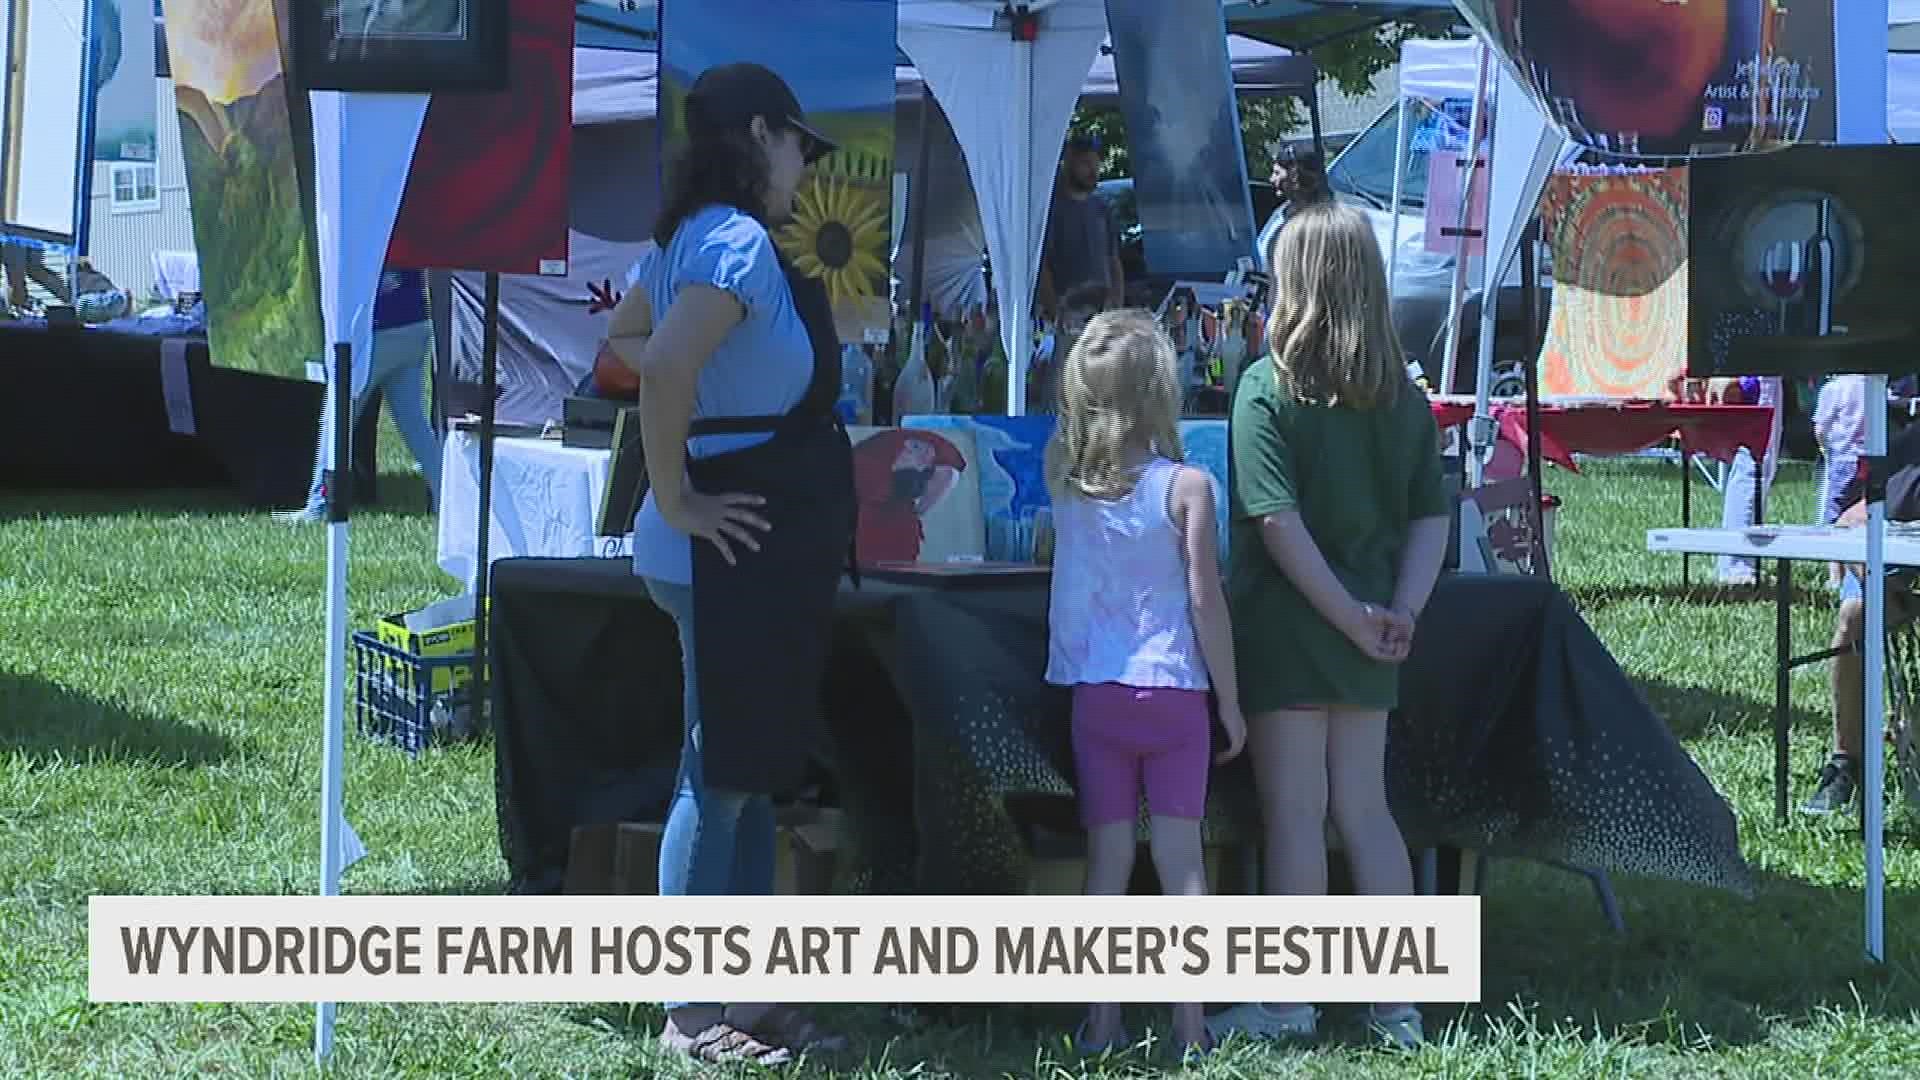 Local artists gathered at Wyndridge Farm on Aug. 14 to showcase and sell their work, enjoy music and run workshops.